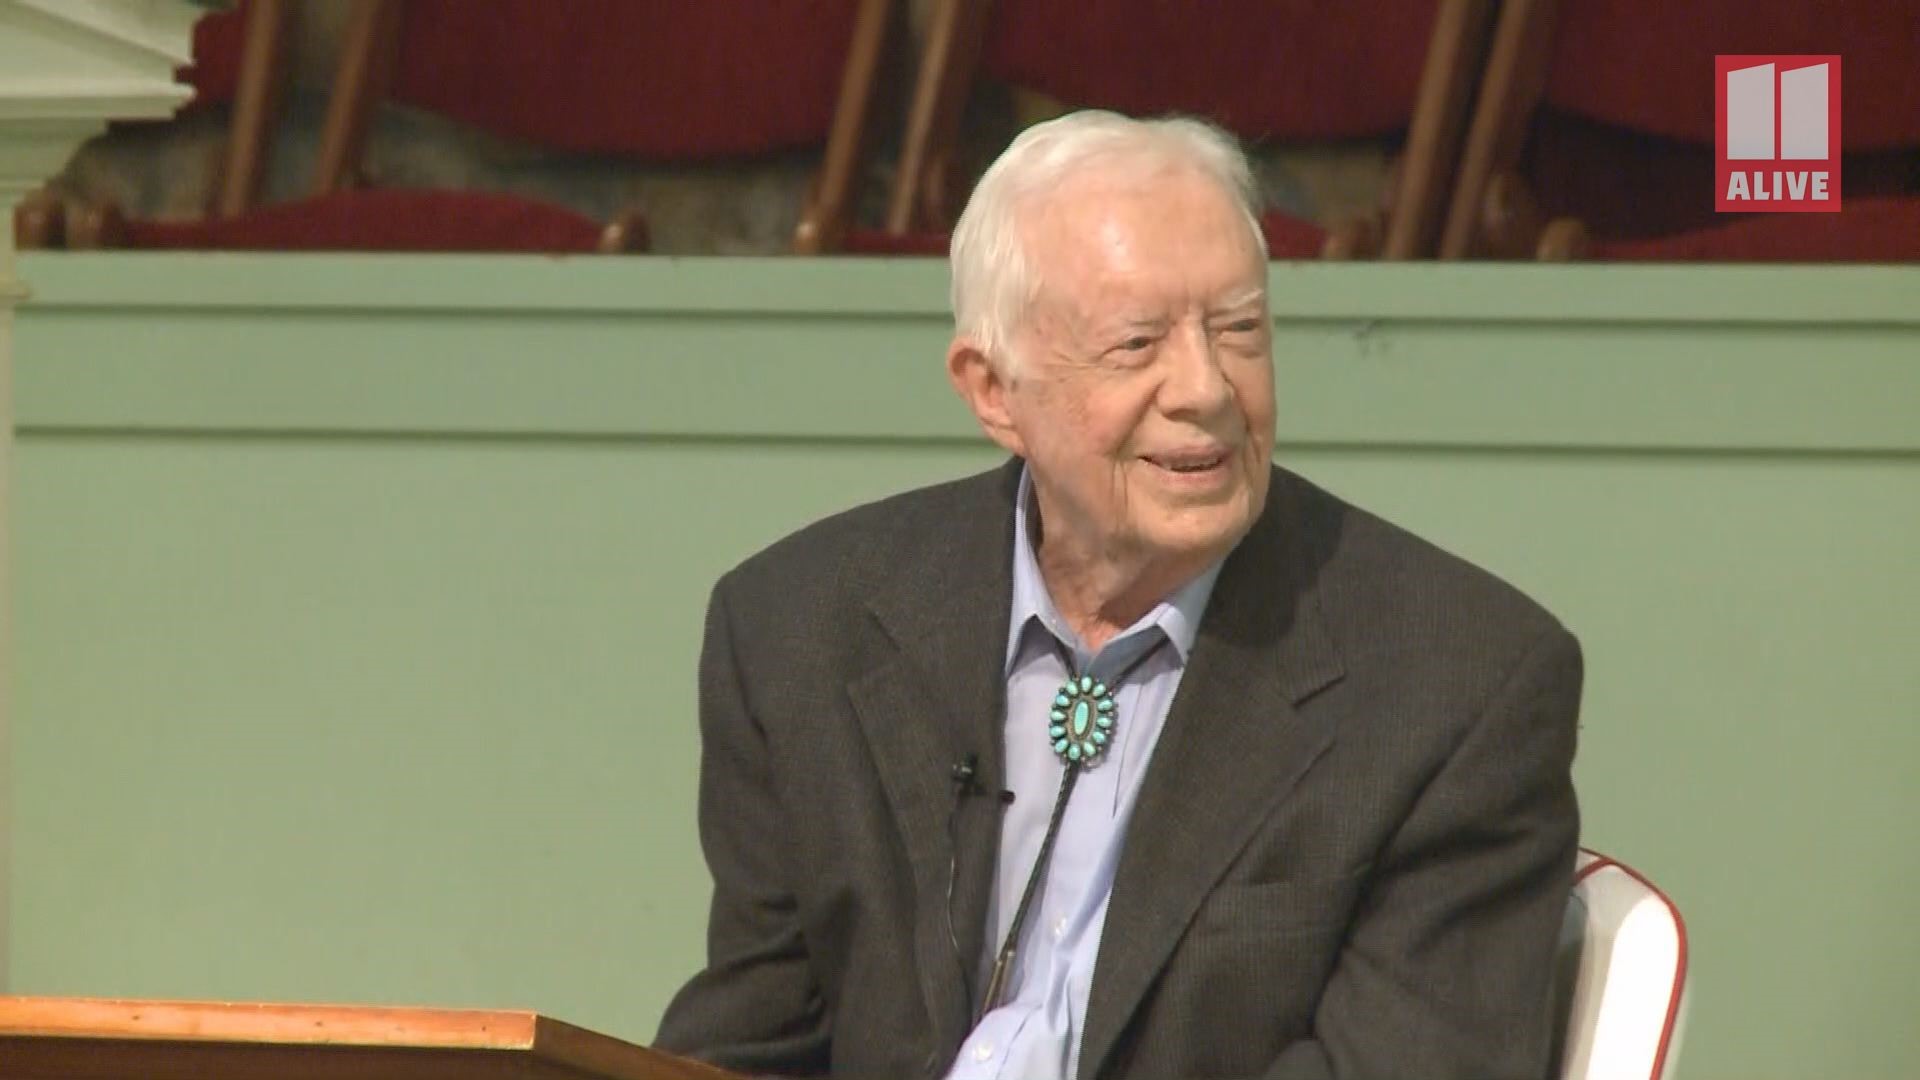 The Civil Rights icon joined the former President in Jimmy Carter's weekly address from Maranatha Baptist Church in Plains, Georgia.